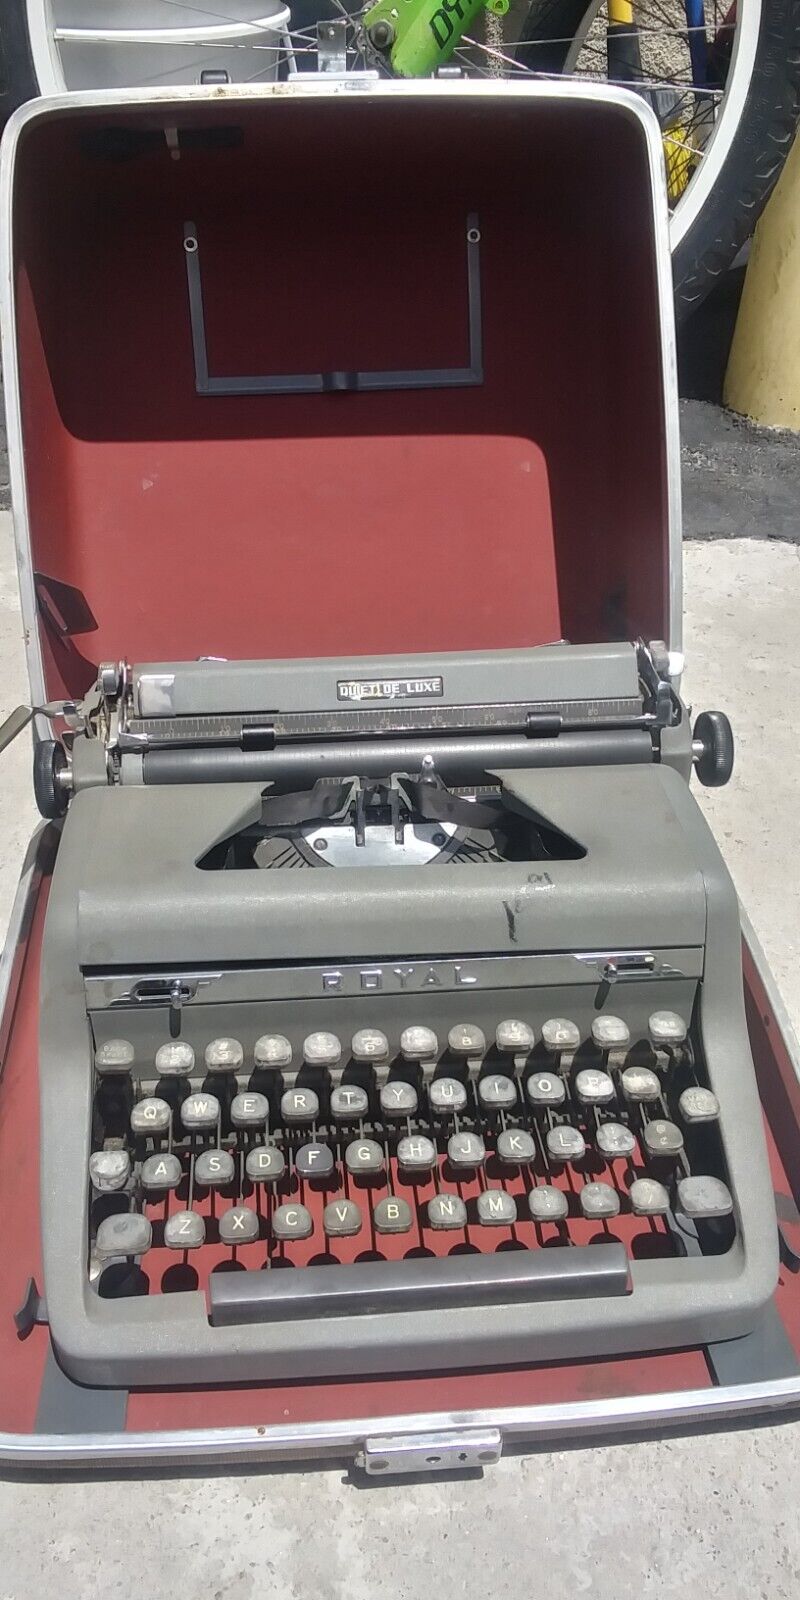 Vintage Royal Quiet Deluxe Portable Typewriter With Case